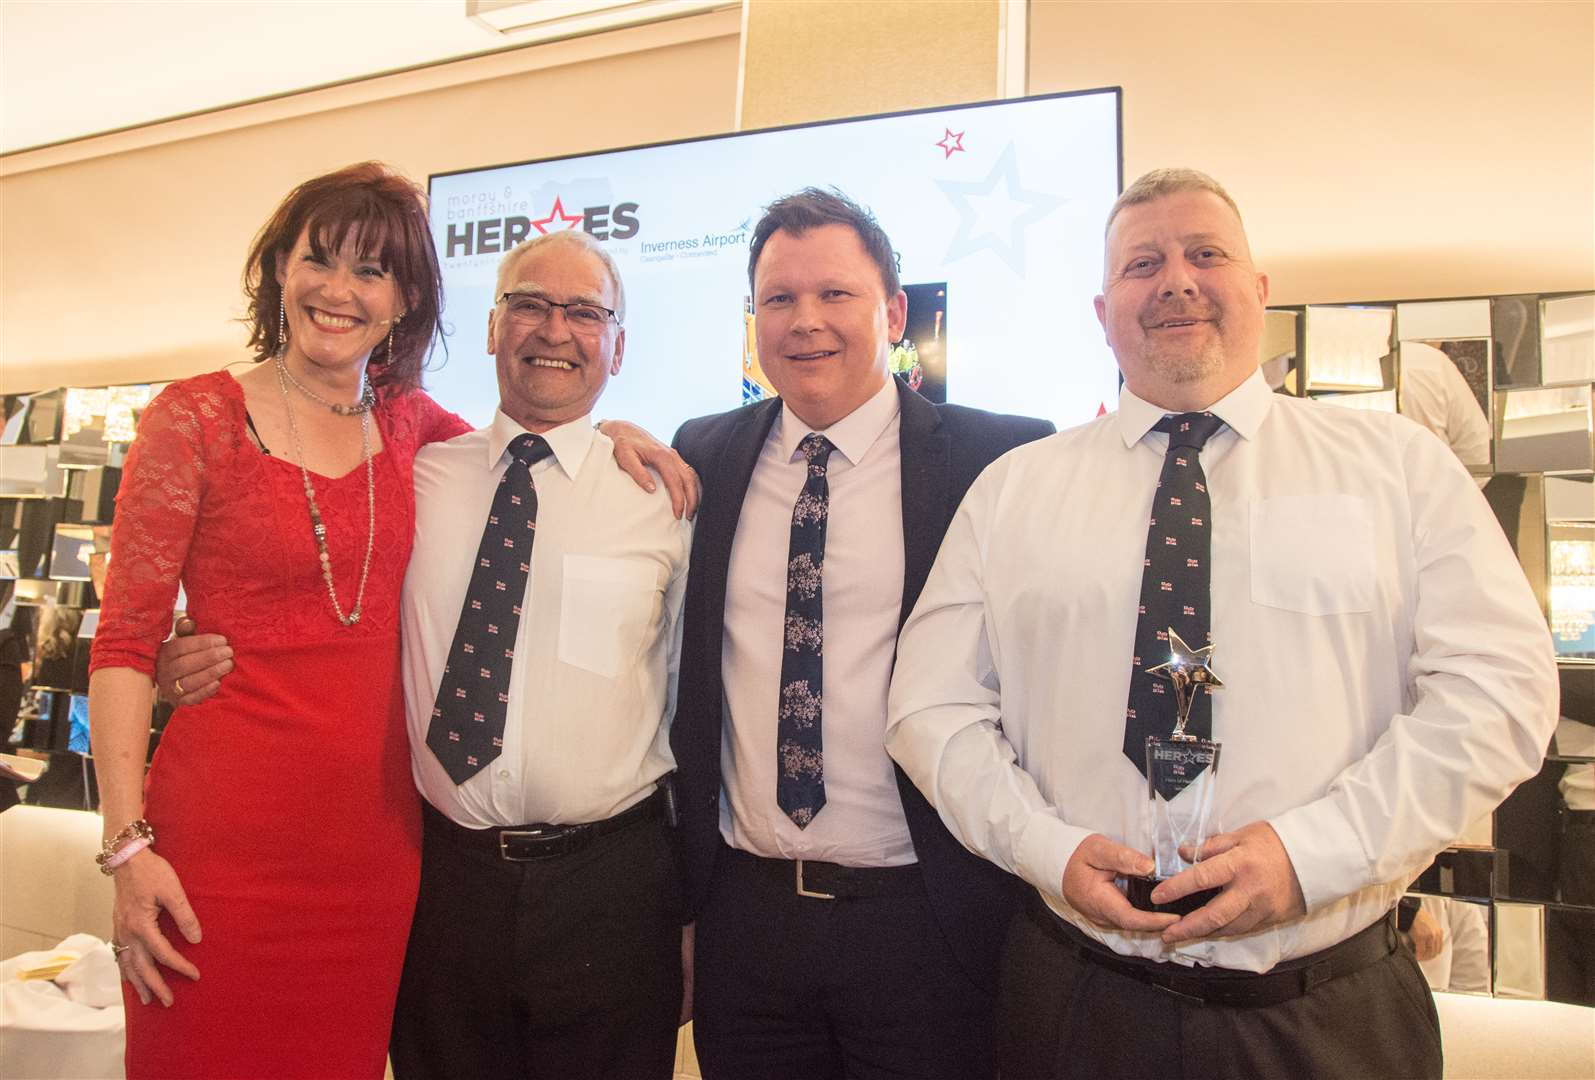 The Buckie RNLI heroes Joe Herd and Dave Grant with Nicky Marr and Dave Main of Springfield. Picture: Becky Saunderson. Image No.043395.